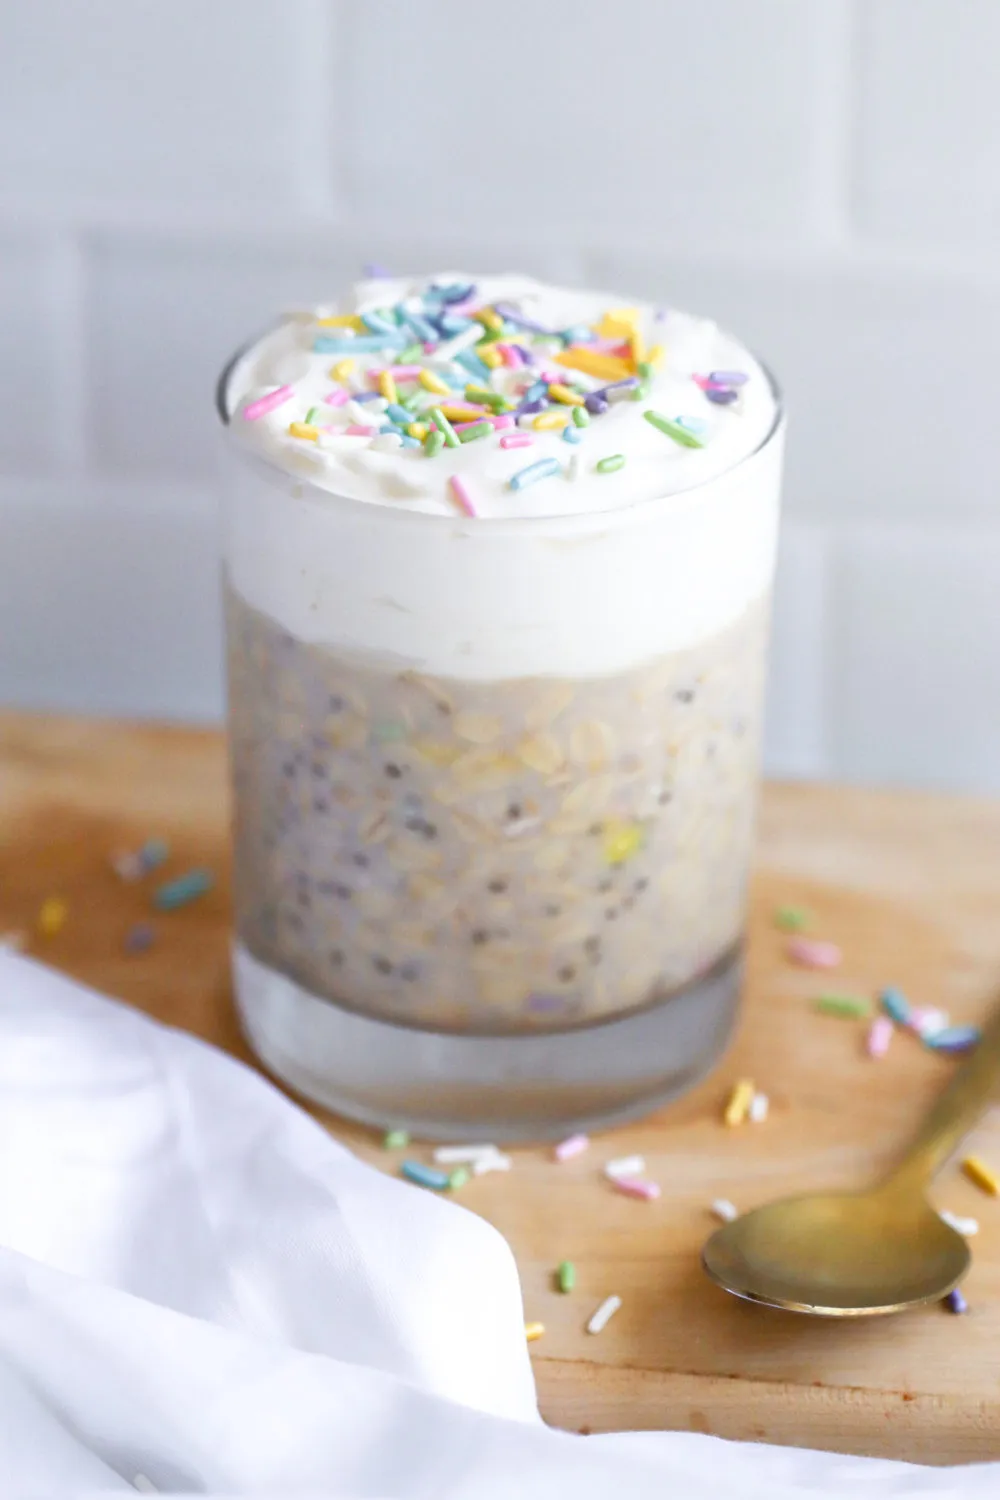 high protein birthday cake overnight oats with sprinkles in a glass cup